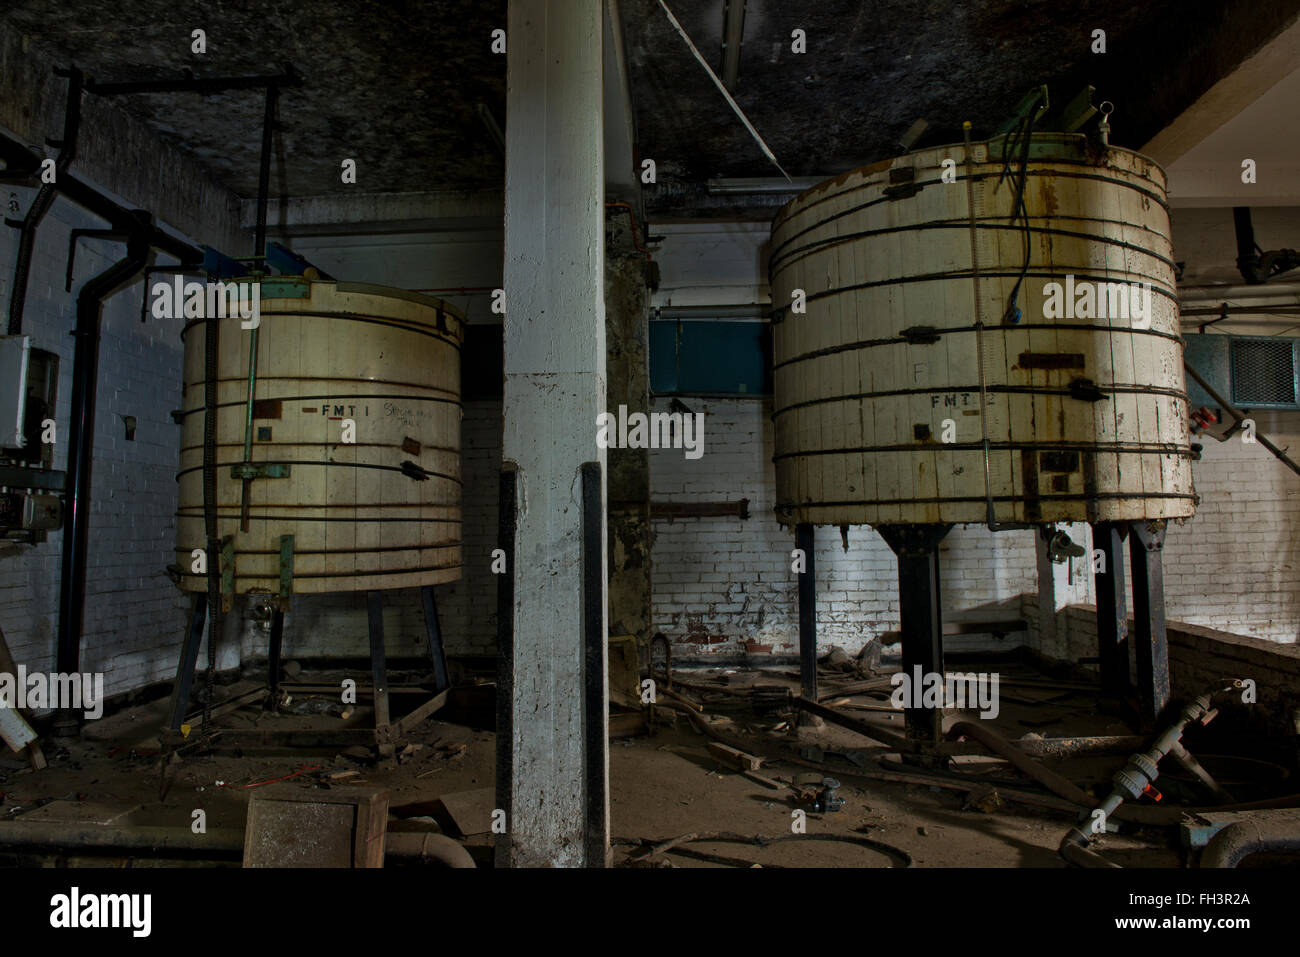 Vats still standing within the closed Cannon Brewery (Stones Brewery), Neepsend, Sheffield, South Yorkshire, UK Stock Photo